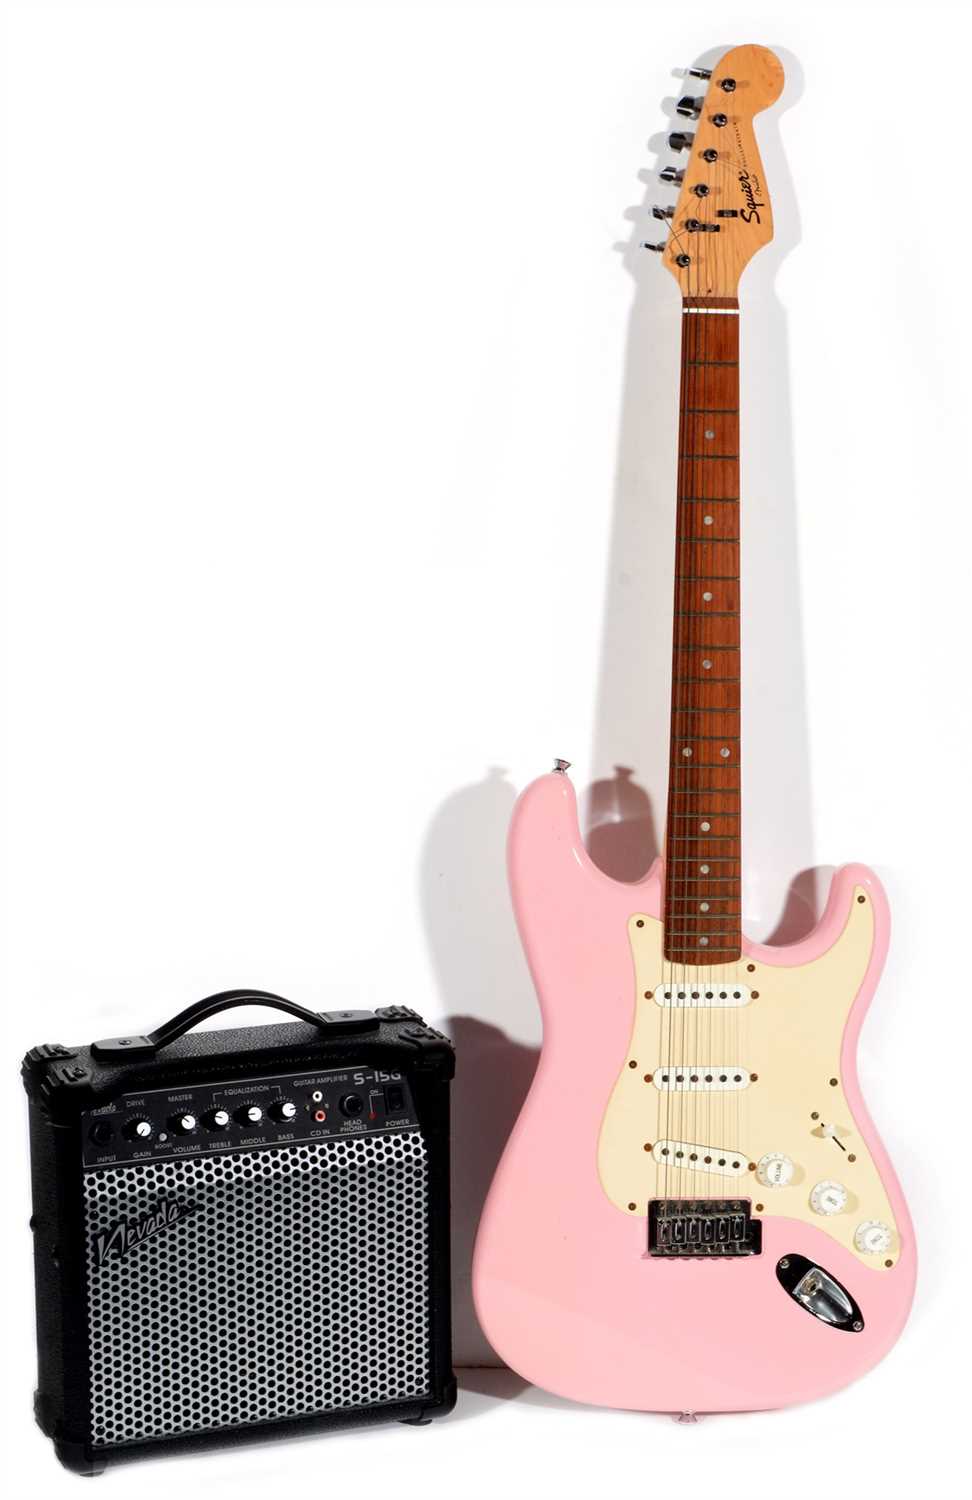 Lot 151 - A Fender Squier Bullet pink Stratocaster and amp